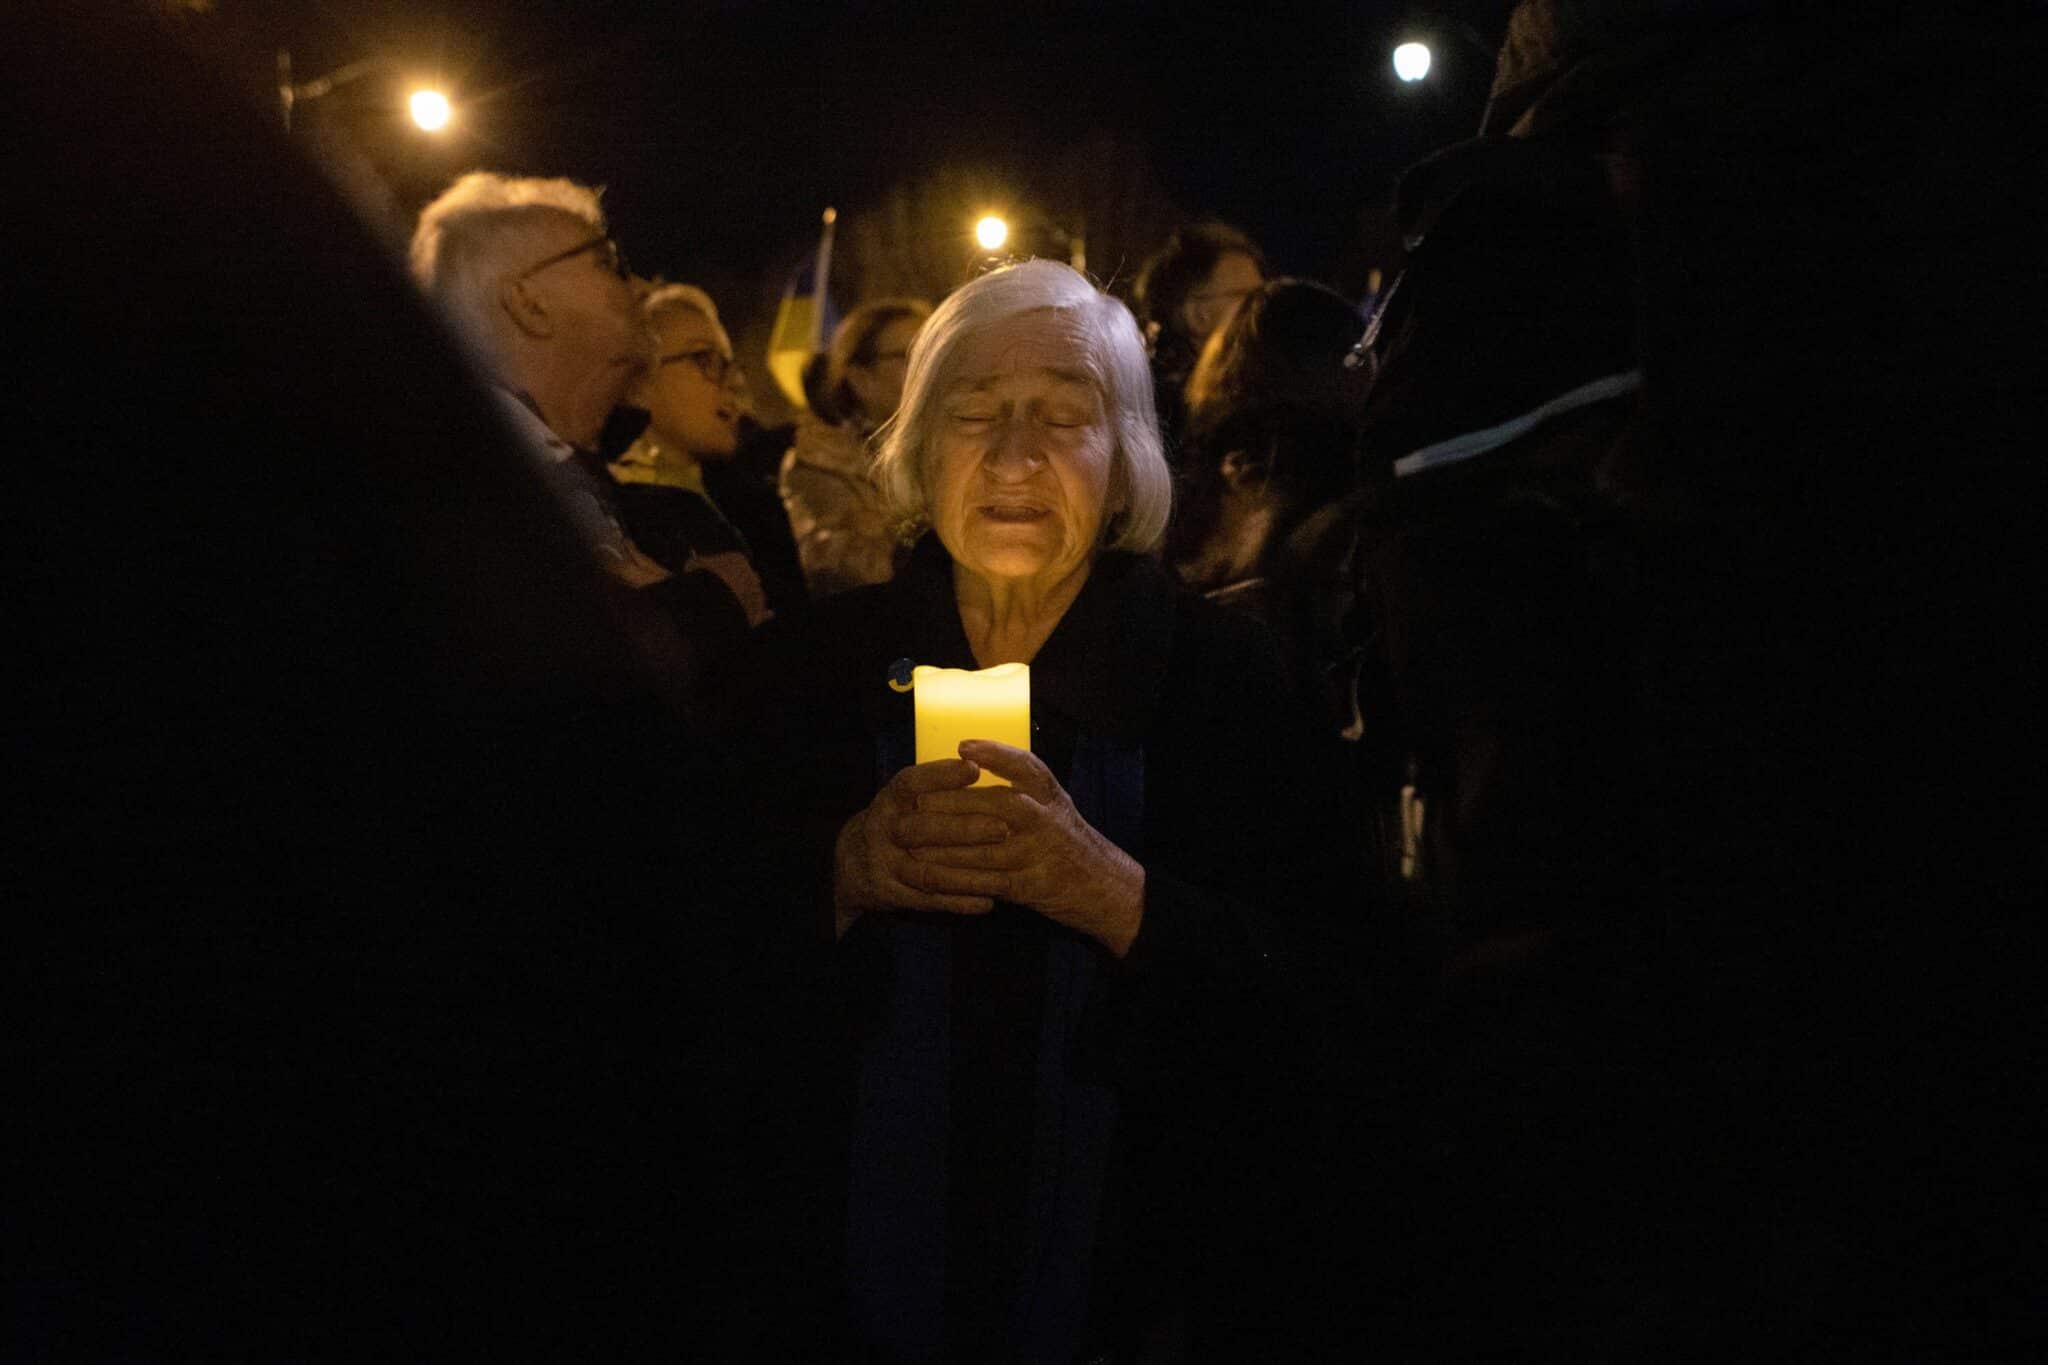 A woman and other members of the Ukrainian community participate in a candlelight vigil in front of the Russian Embassy in Washington Feb. 24, 2023, to mark the first anniversary of Russia's invasion of Ukraine. (OSV News photo/Anna Rose Layden, Reuters)